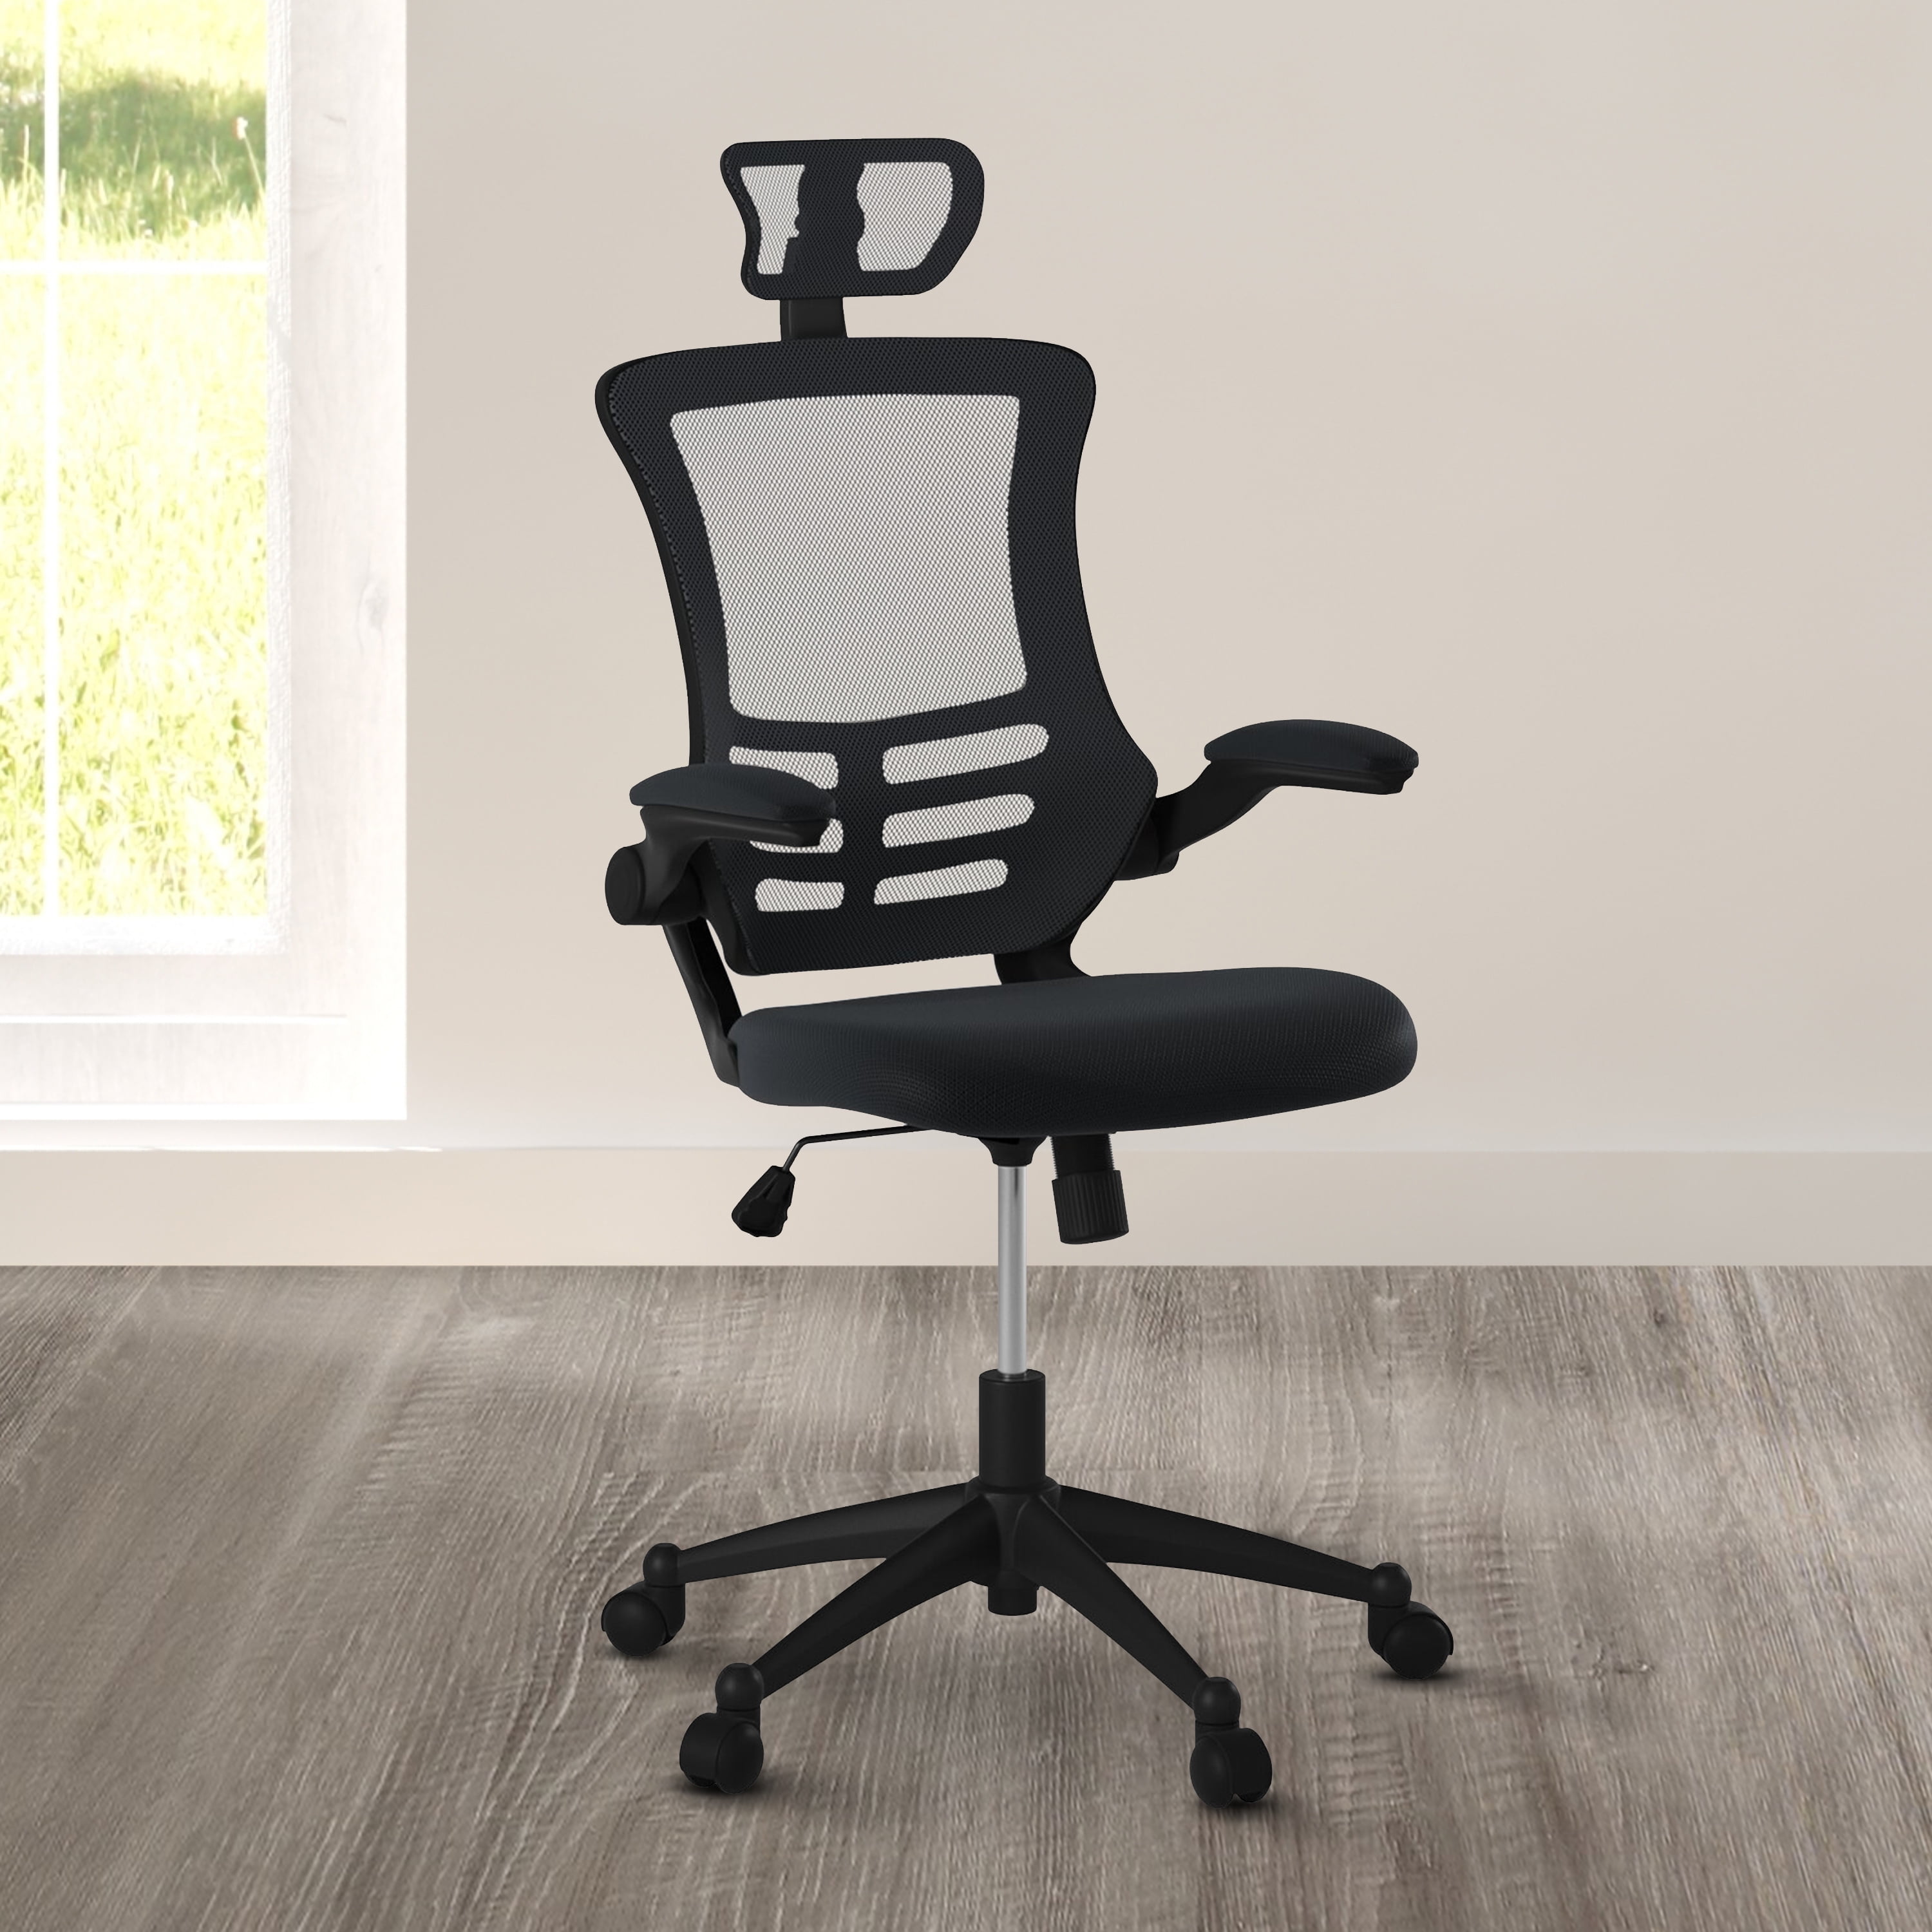 High Back Mesh Executive Office Chair, Chair With Headrest Or Not